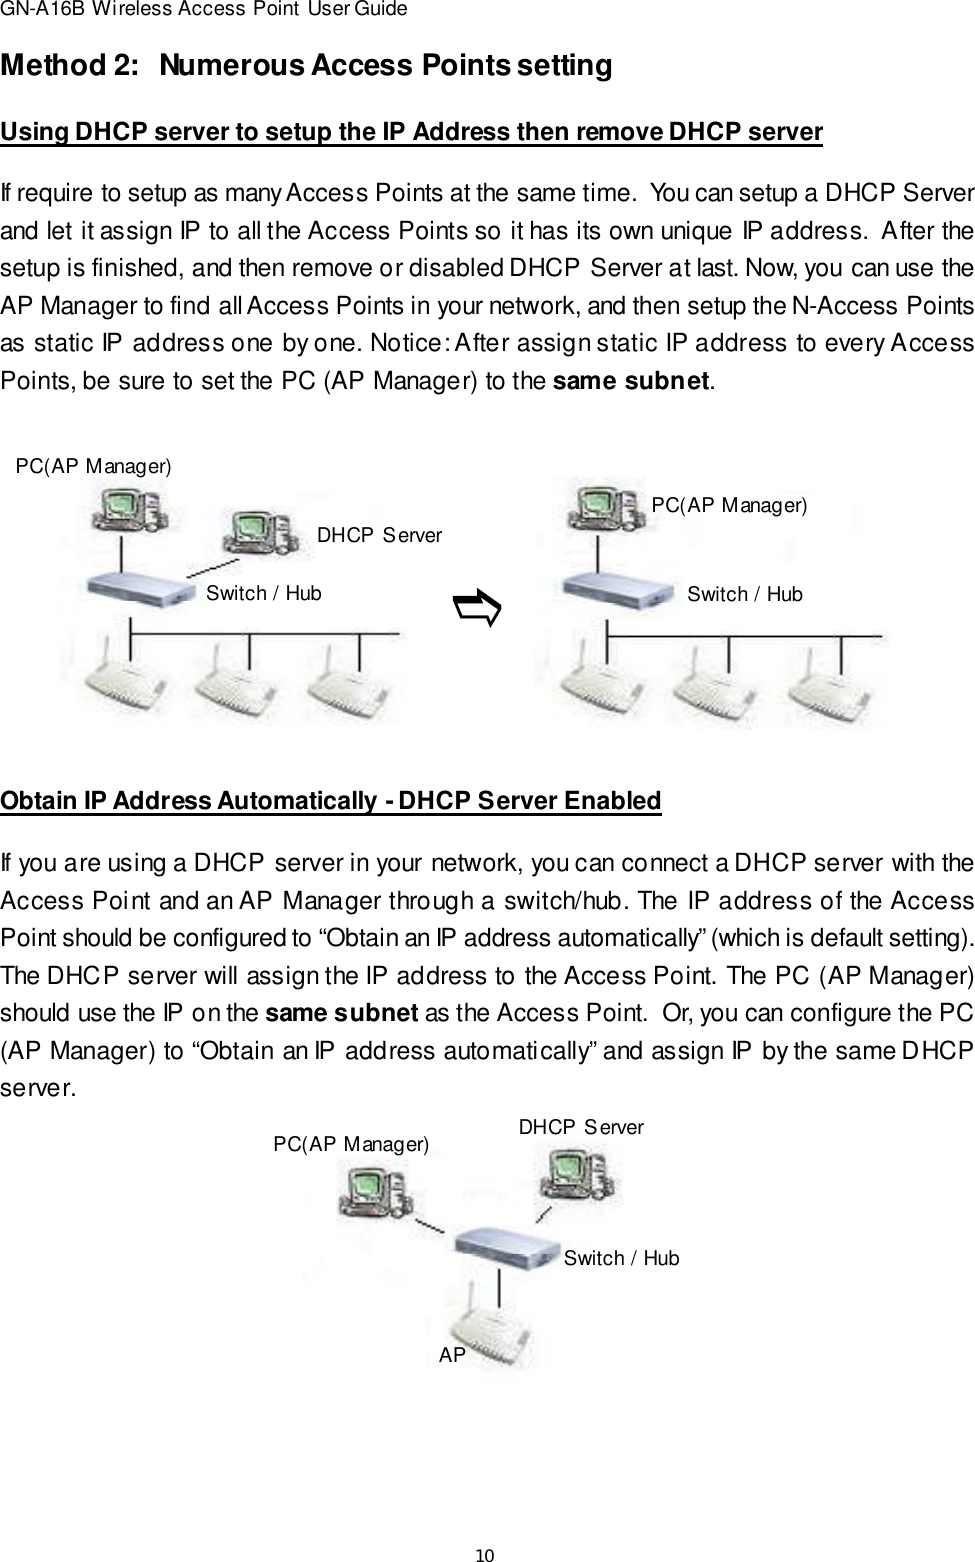 10GN-A16B Wireless Access Point User GuideMethod 2:   Numerous Access Points settingIf require to setup as many Access Points at the same time.  You can setup a DHCP Serverand let it assign IP to all the Access Points so it has its own unique IP address.  After thesetup is finished, and then remove or disabled DHCP Server at last. Now, you can use theAP Manager to find all Access Points in your network, and then setup the N-Access Pointsas static IP address one by one. Notice: After assign static IP address to every AccessPoints, be sure to set the PC (AP Manager) to the same subnet.Using DHCP server to setup the IP Address then remove DHCP serverPC(AP Manager)DHCP ServerSwitch / HubPC(AP Manager)Switch / HubeObtain IP Address Automatically - DHCP Server EnabledIf you are using a DHCP server in your network, you can connect a DHCP server with theAccess Point and an AP Manager through a switch/hub. The IP address of the AccessPoint should be configured to “Obtain an IP address automatically” (which is default setting).The DHCP server will assign the IP address to the Access Point. The PC (AP Manager)should use the IP on the same subnet as the Access Point.  Or, you can configure the PC(AP Manager) to “Obtain an IP address automatically” and assign IP by the same DHCPserver.PC(AP Manager) DHCP ServerSwitch / HubAP